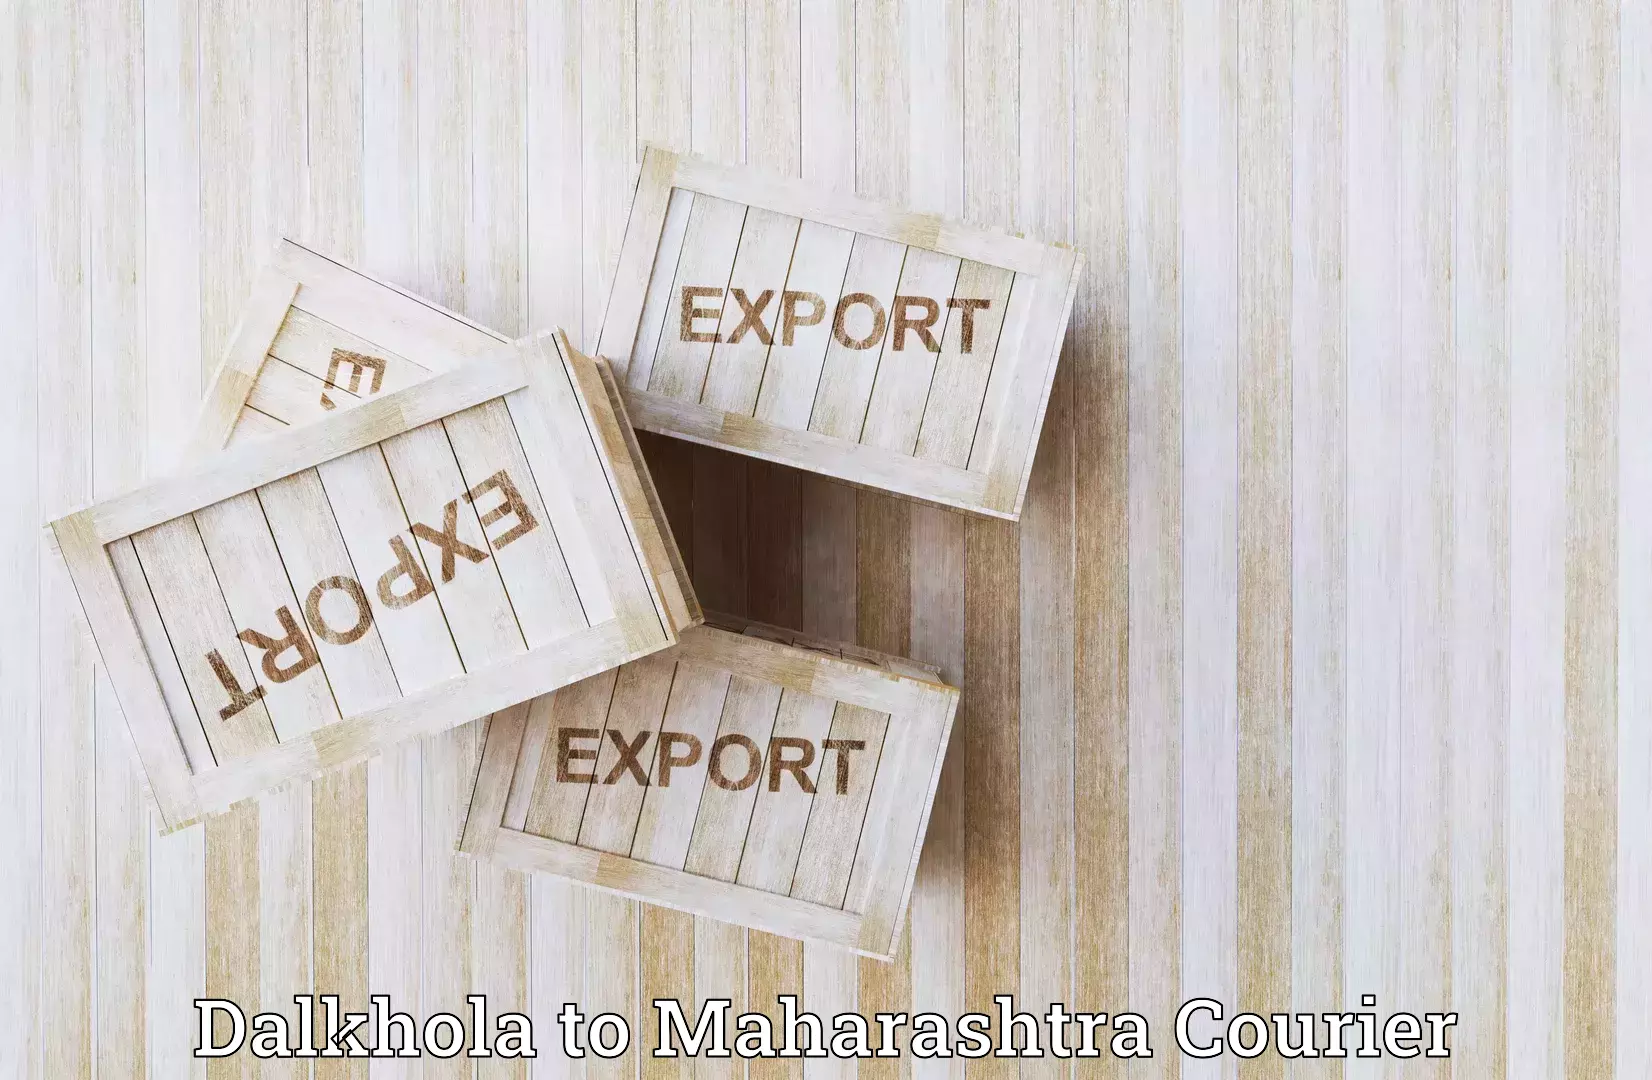 On-demand shipping options Dalkhola to Greater Thane